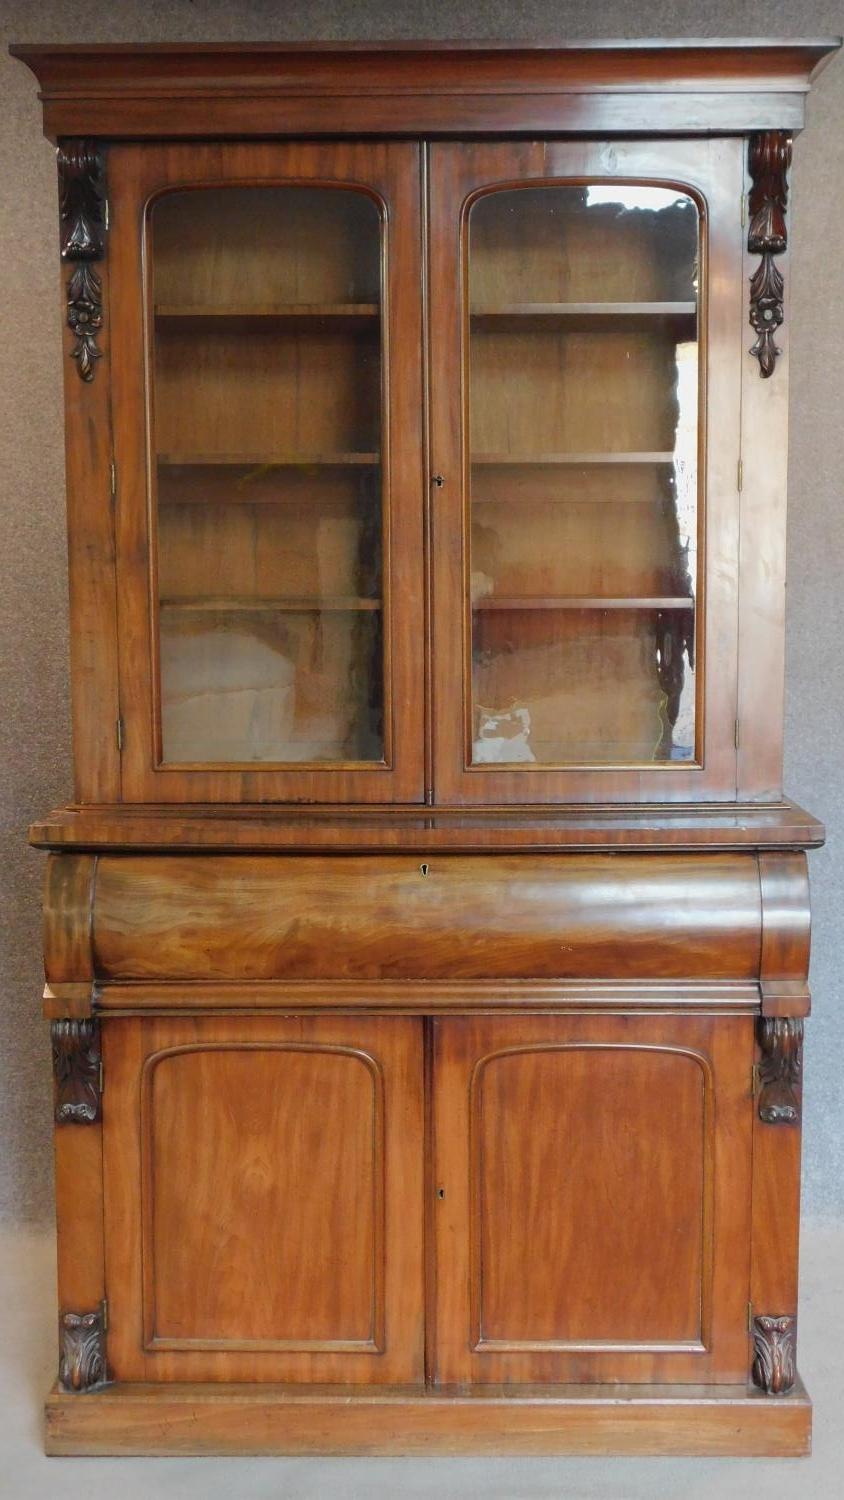 A mid Victorian mahogany two section library bookcase, the upper glazed section above well fitted